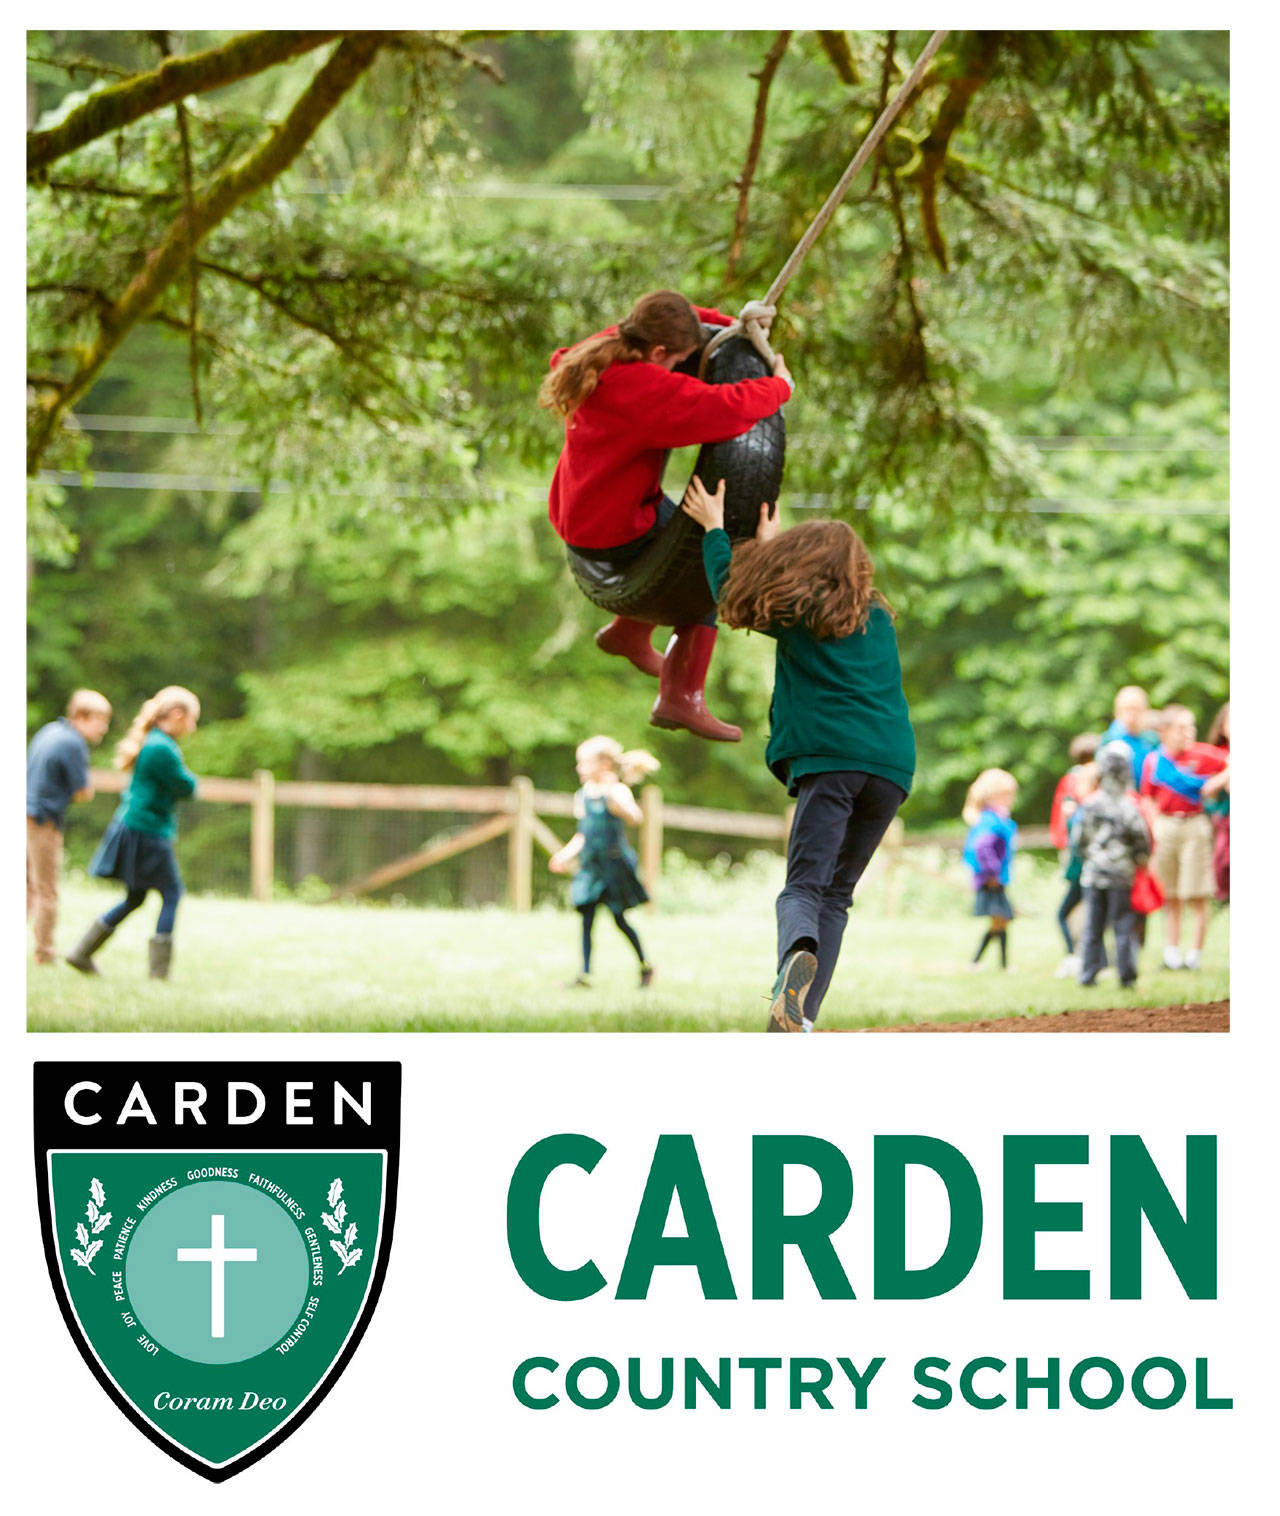 Carden Country School plans open house